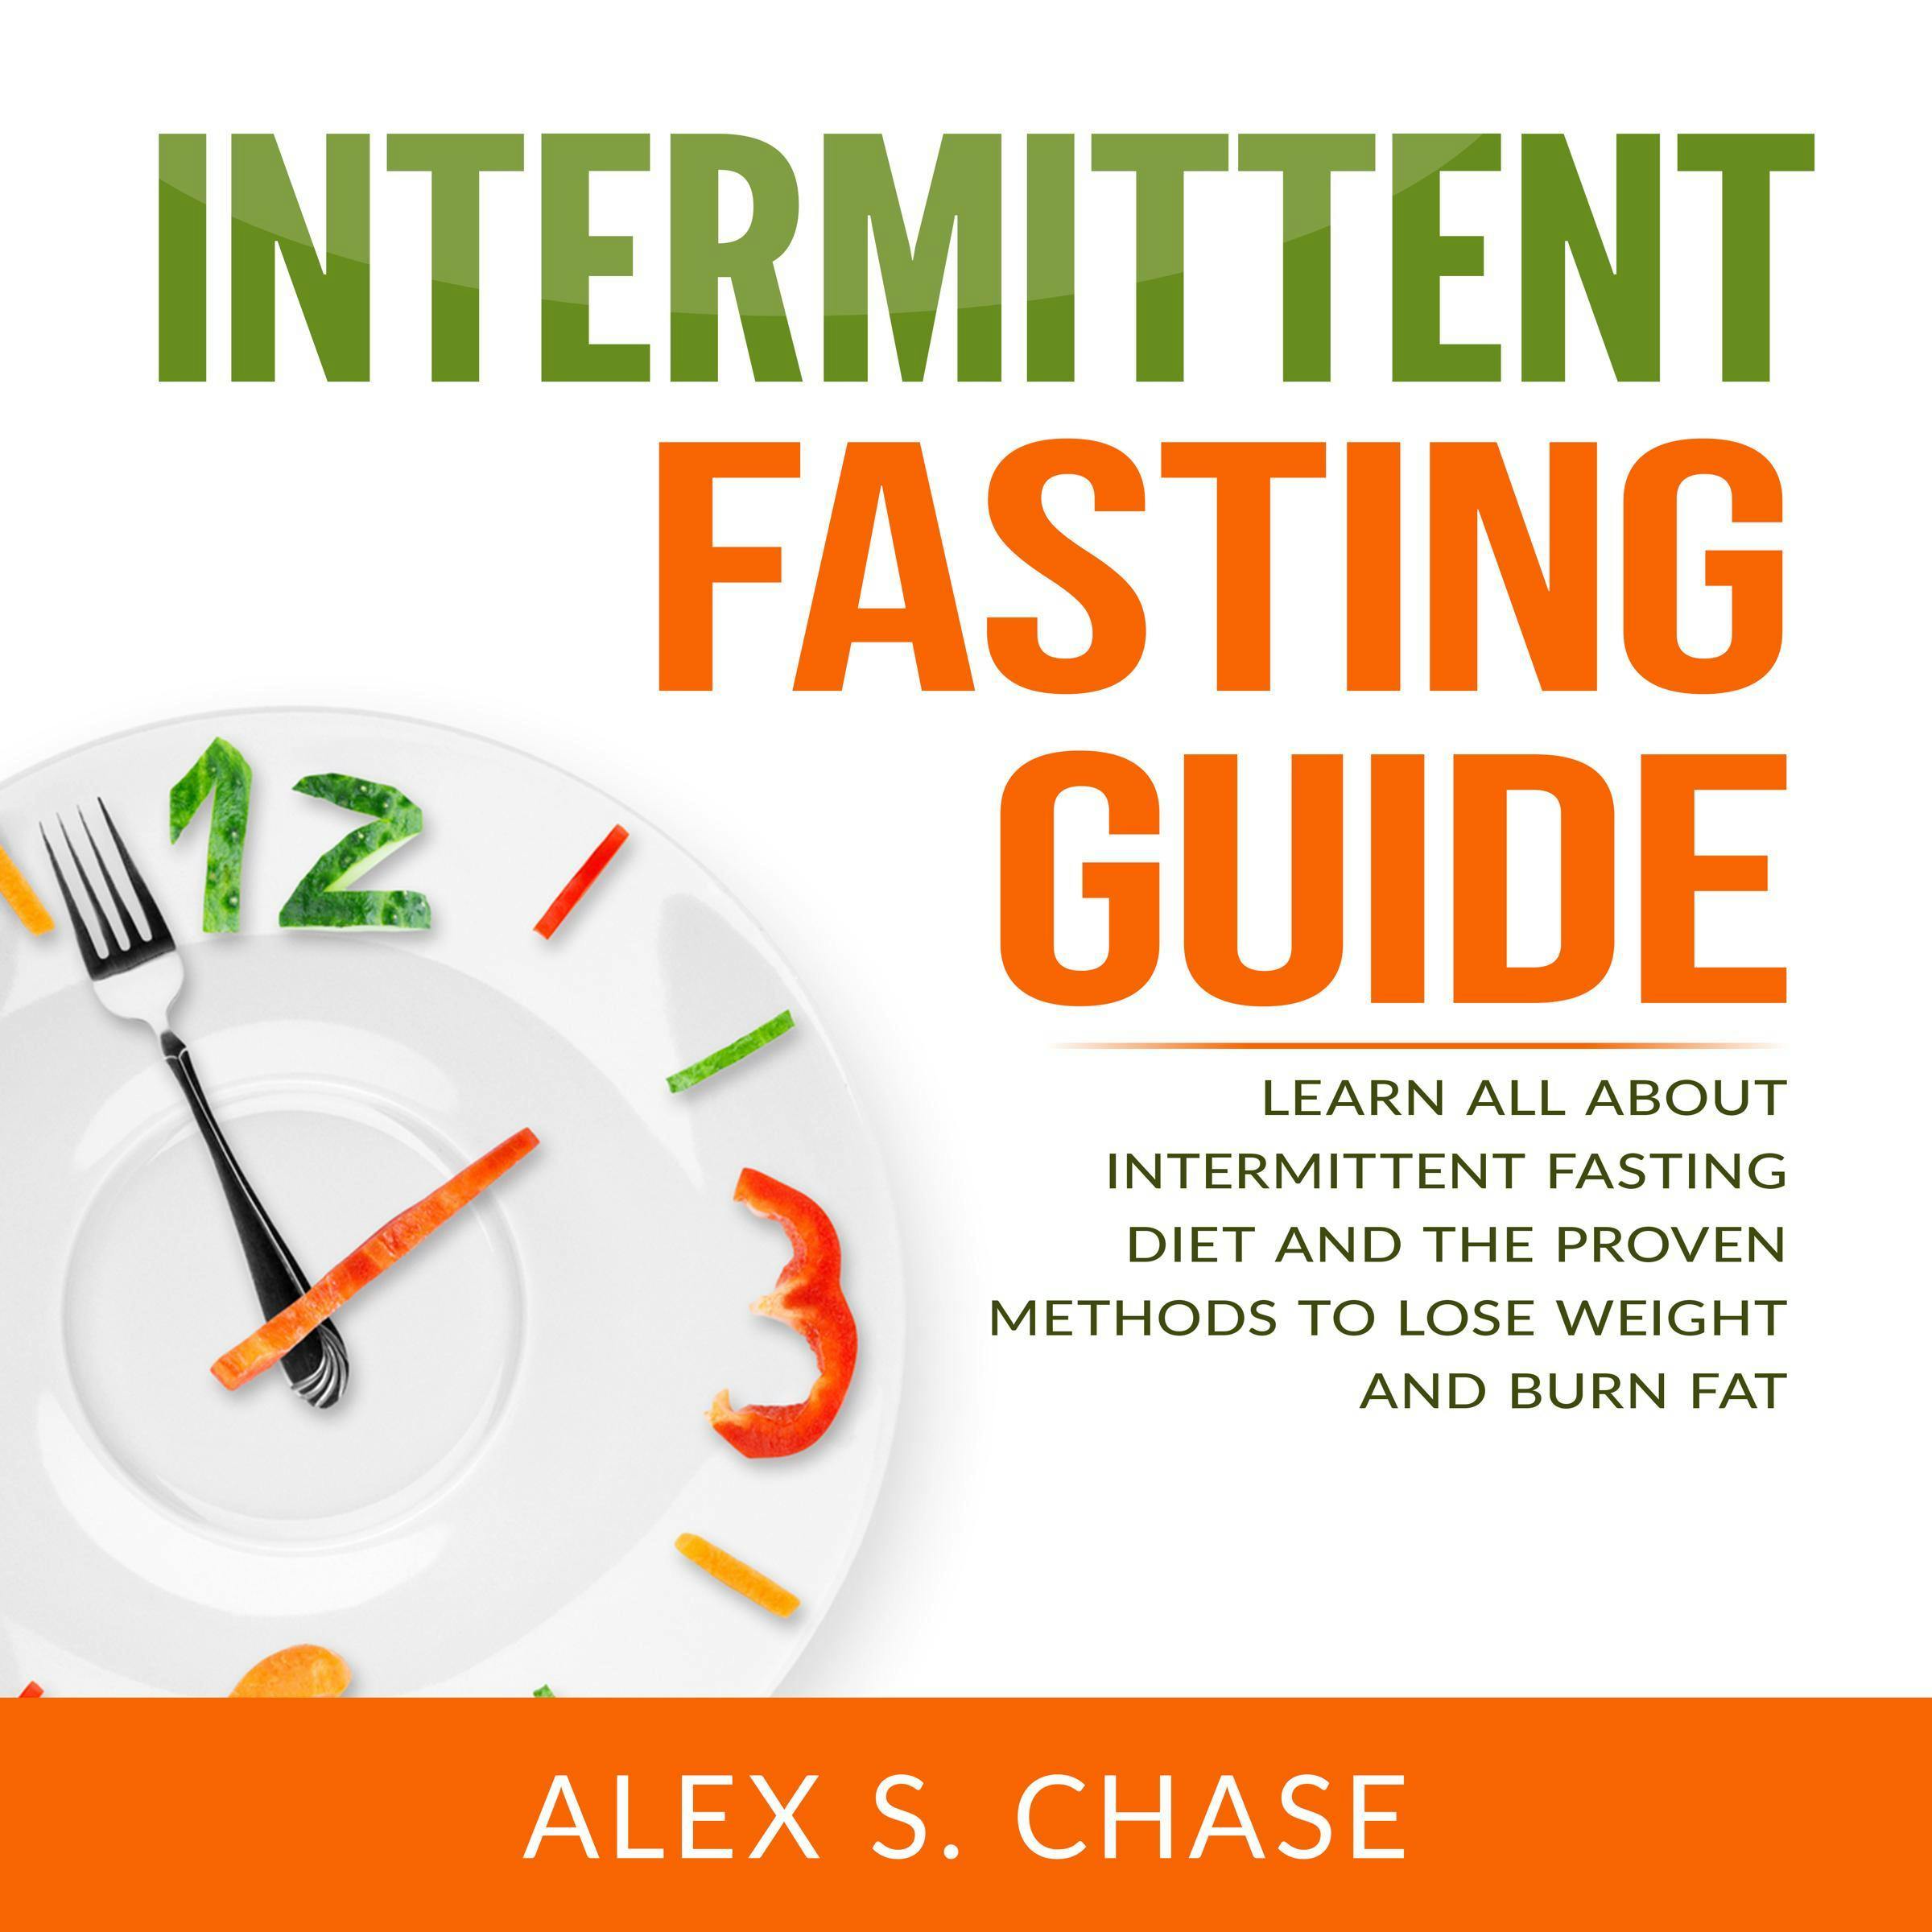 Intermittent Fasting Guide: Learn All About Intermittent Fasting Diet And The Proven Methods To Lose Weight And Burn Fat - Alex S. Chase